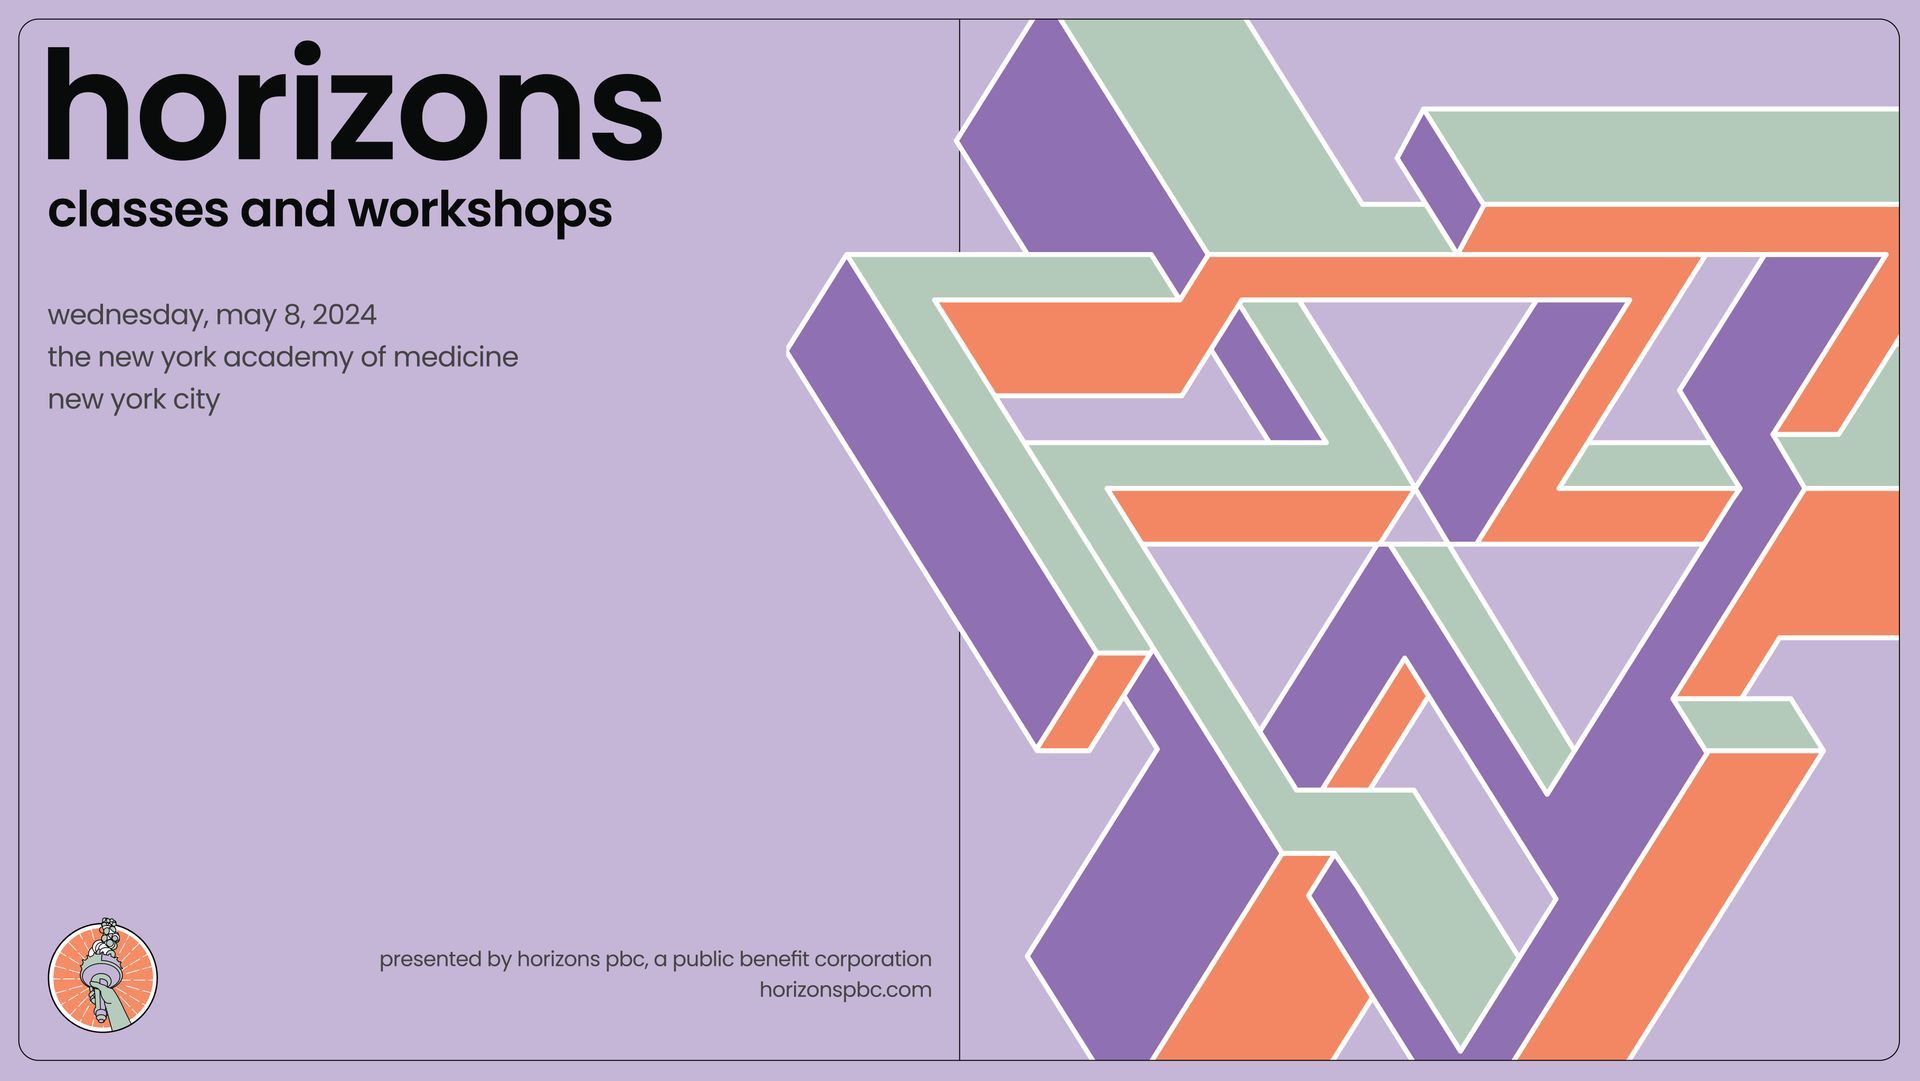 A poster for horizons classes and workshops in new york city